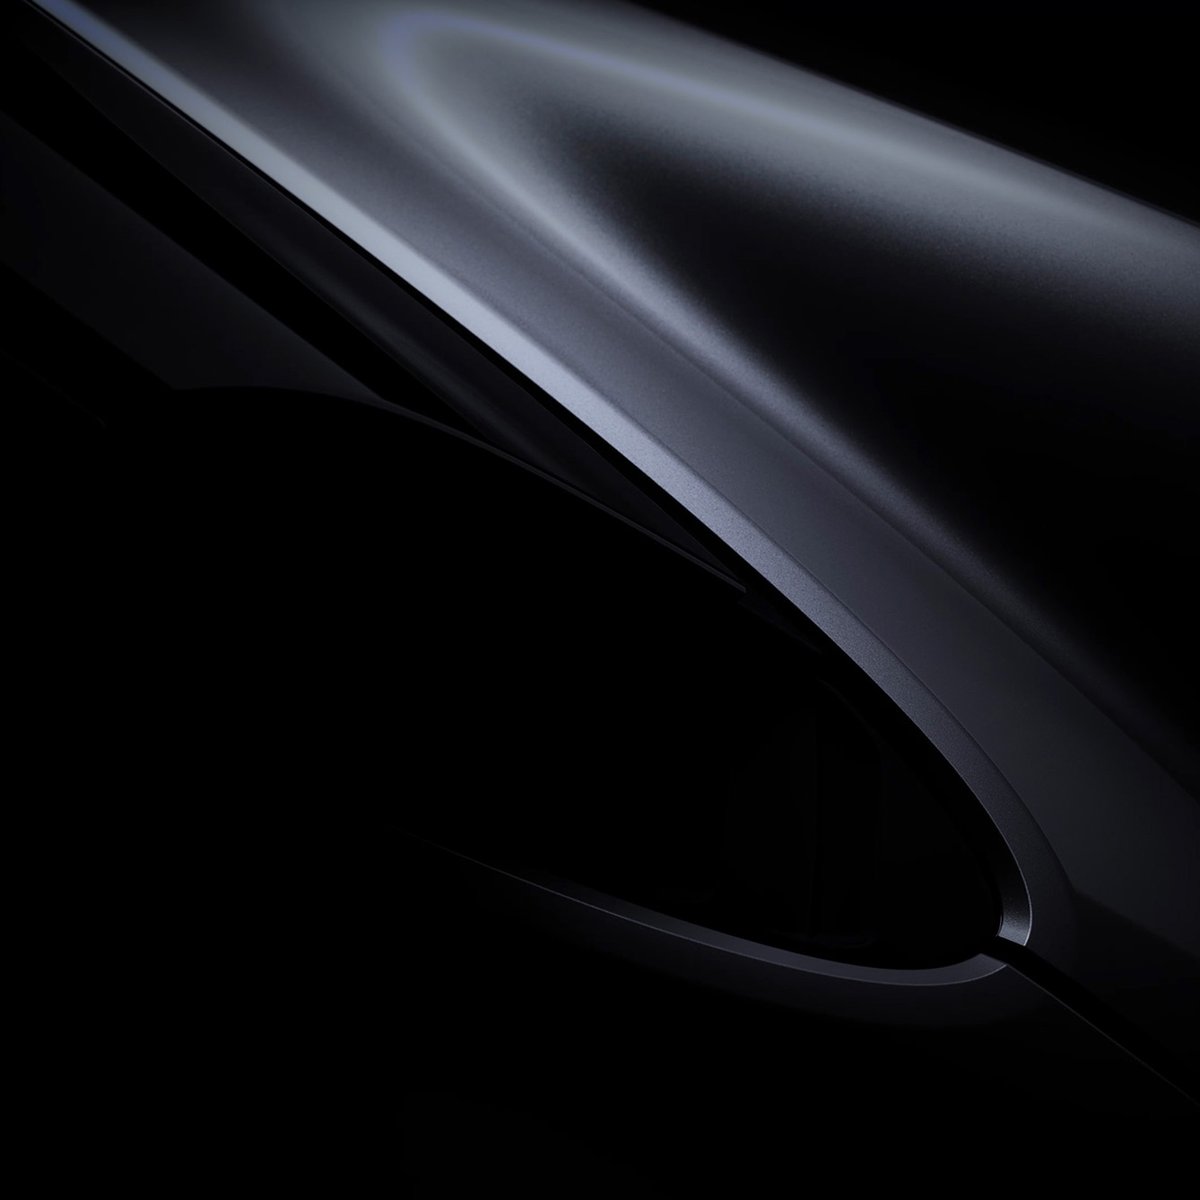 In 48-hours the T.33 Spider – designed and engineered to be the world’s most engaging V12-powered open supercar – will make its global debut. View the reveal at gordonmurrayautomotive.com on Tuesday 04 April at 17:00 BST #gordonmurrayautomotive #gordonmurray#v12 #gma